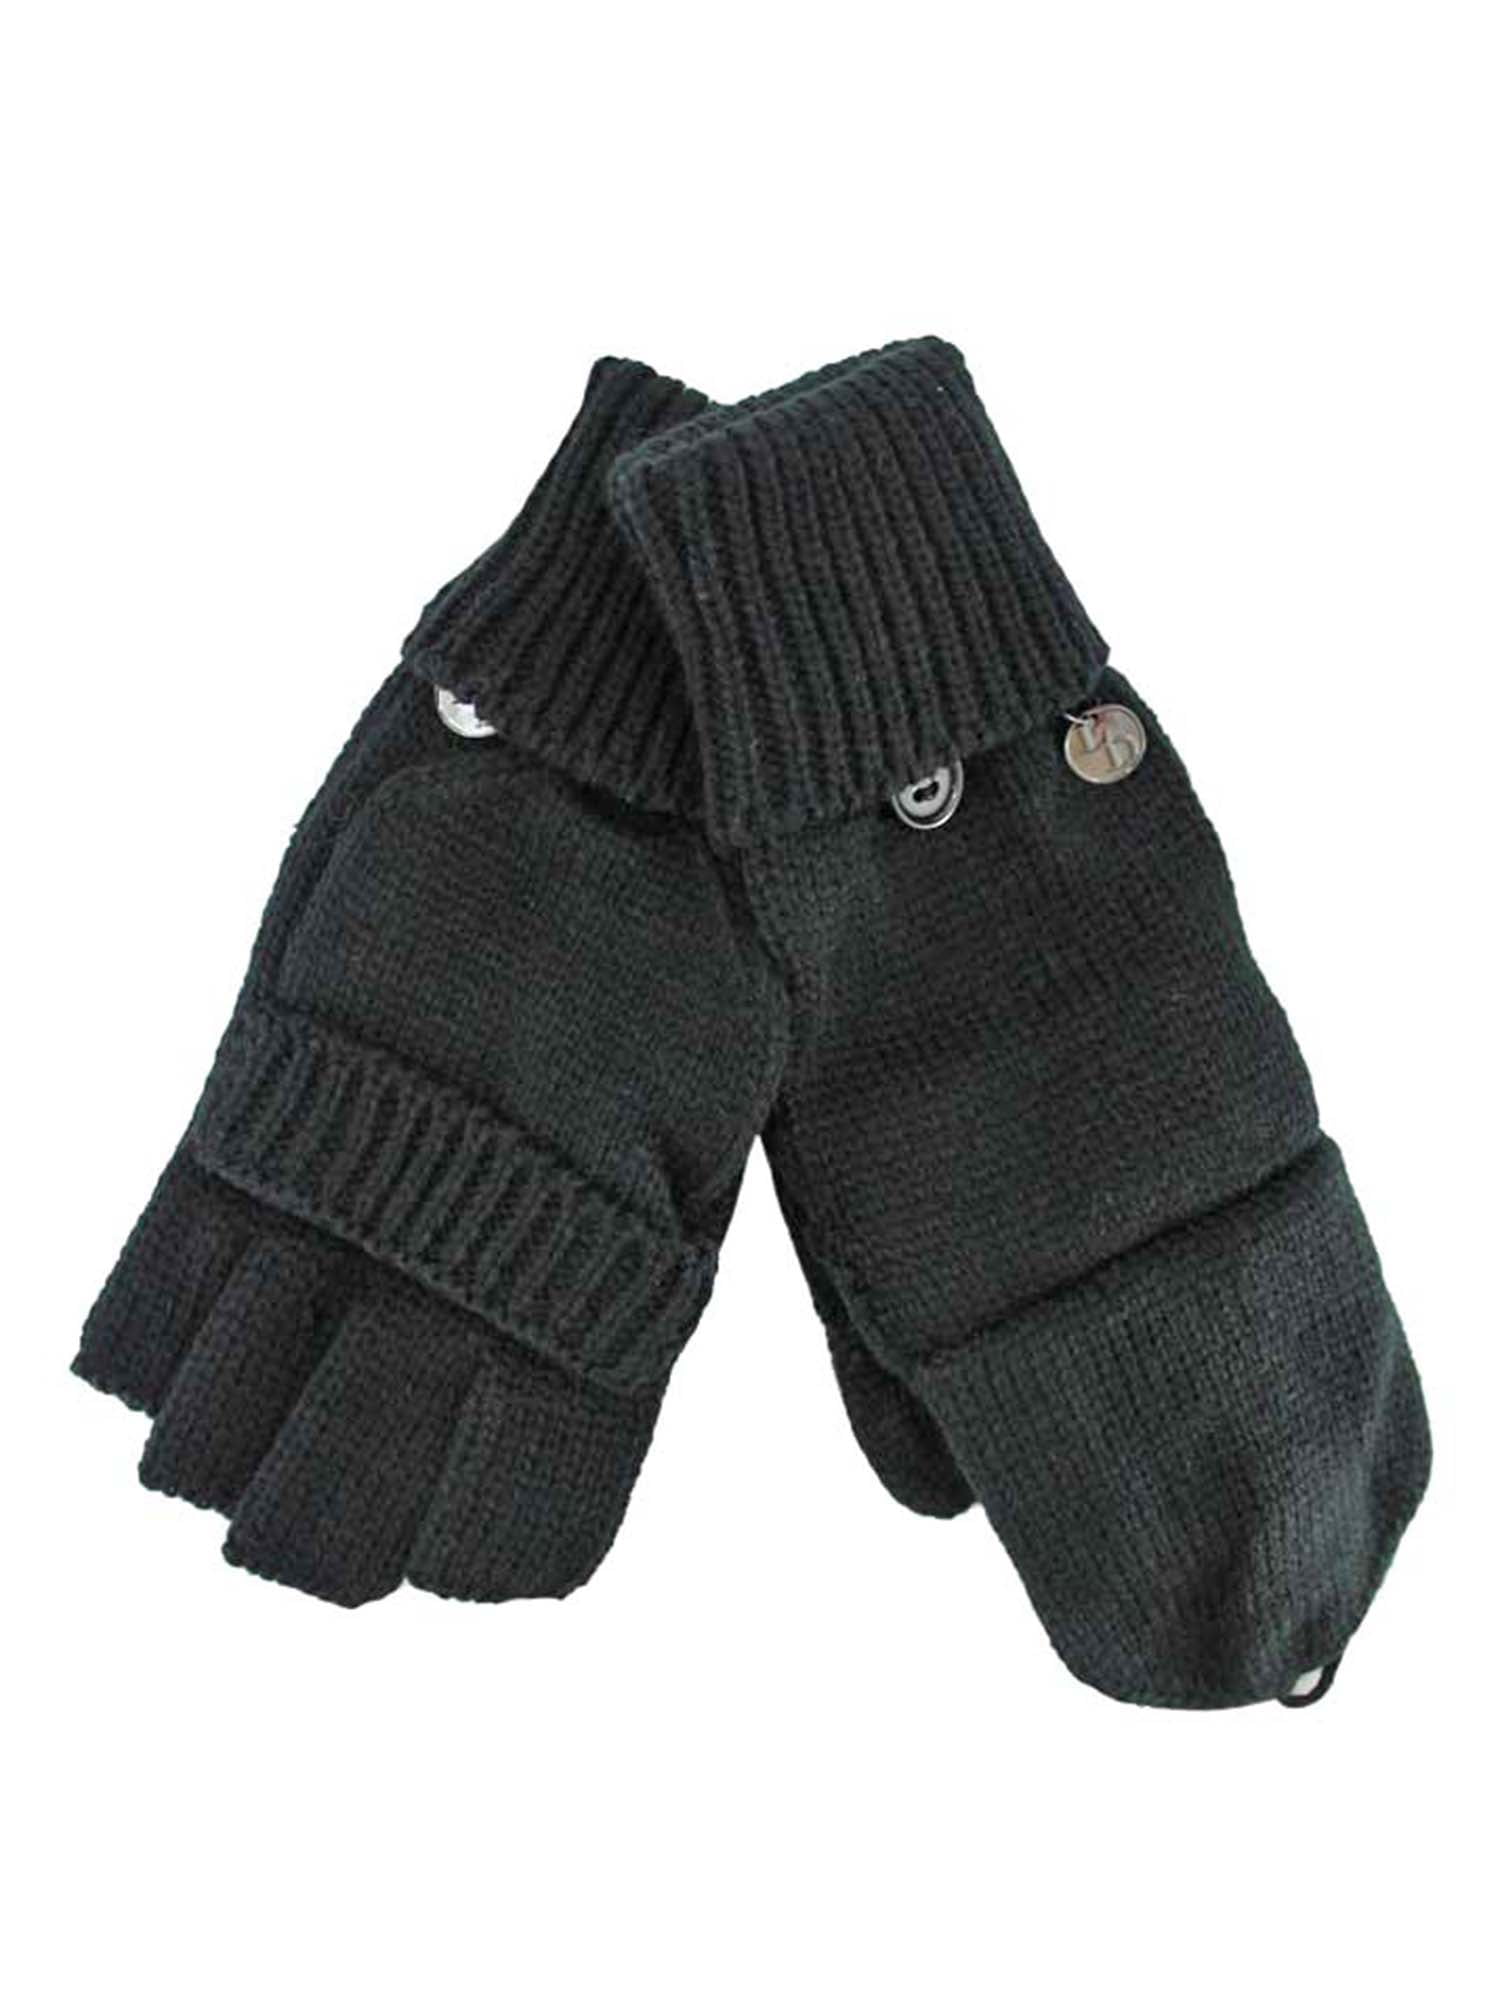 Fingerless gloves with Mitten Covers. Black Thinsulate Adults Shooter Mitts 